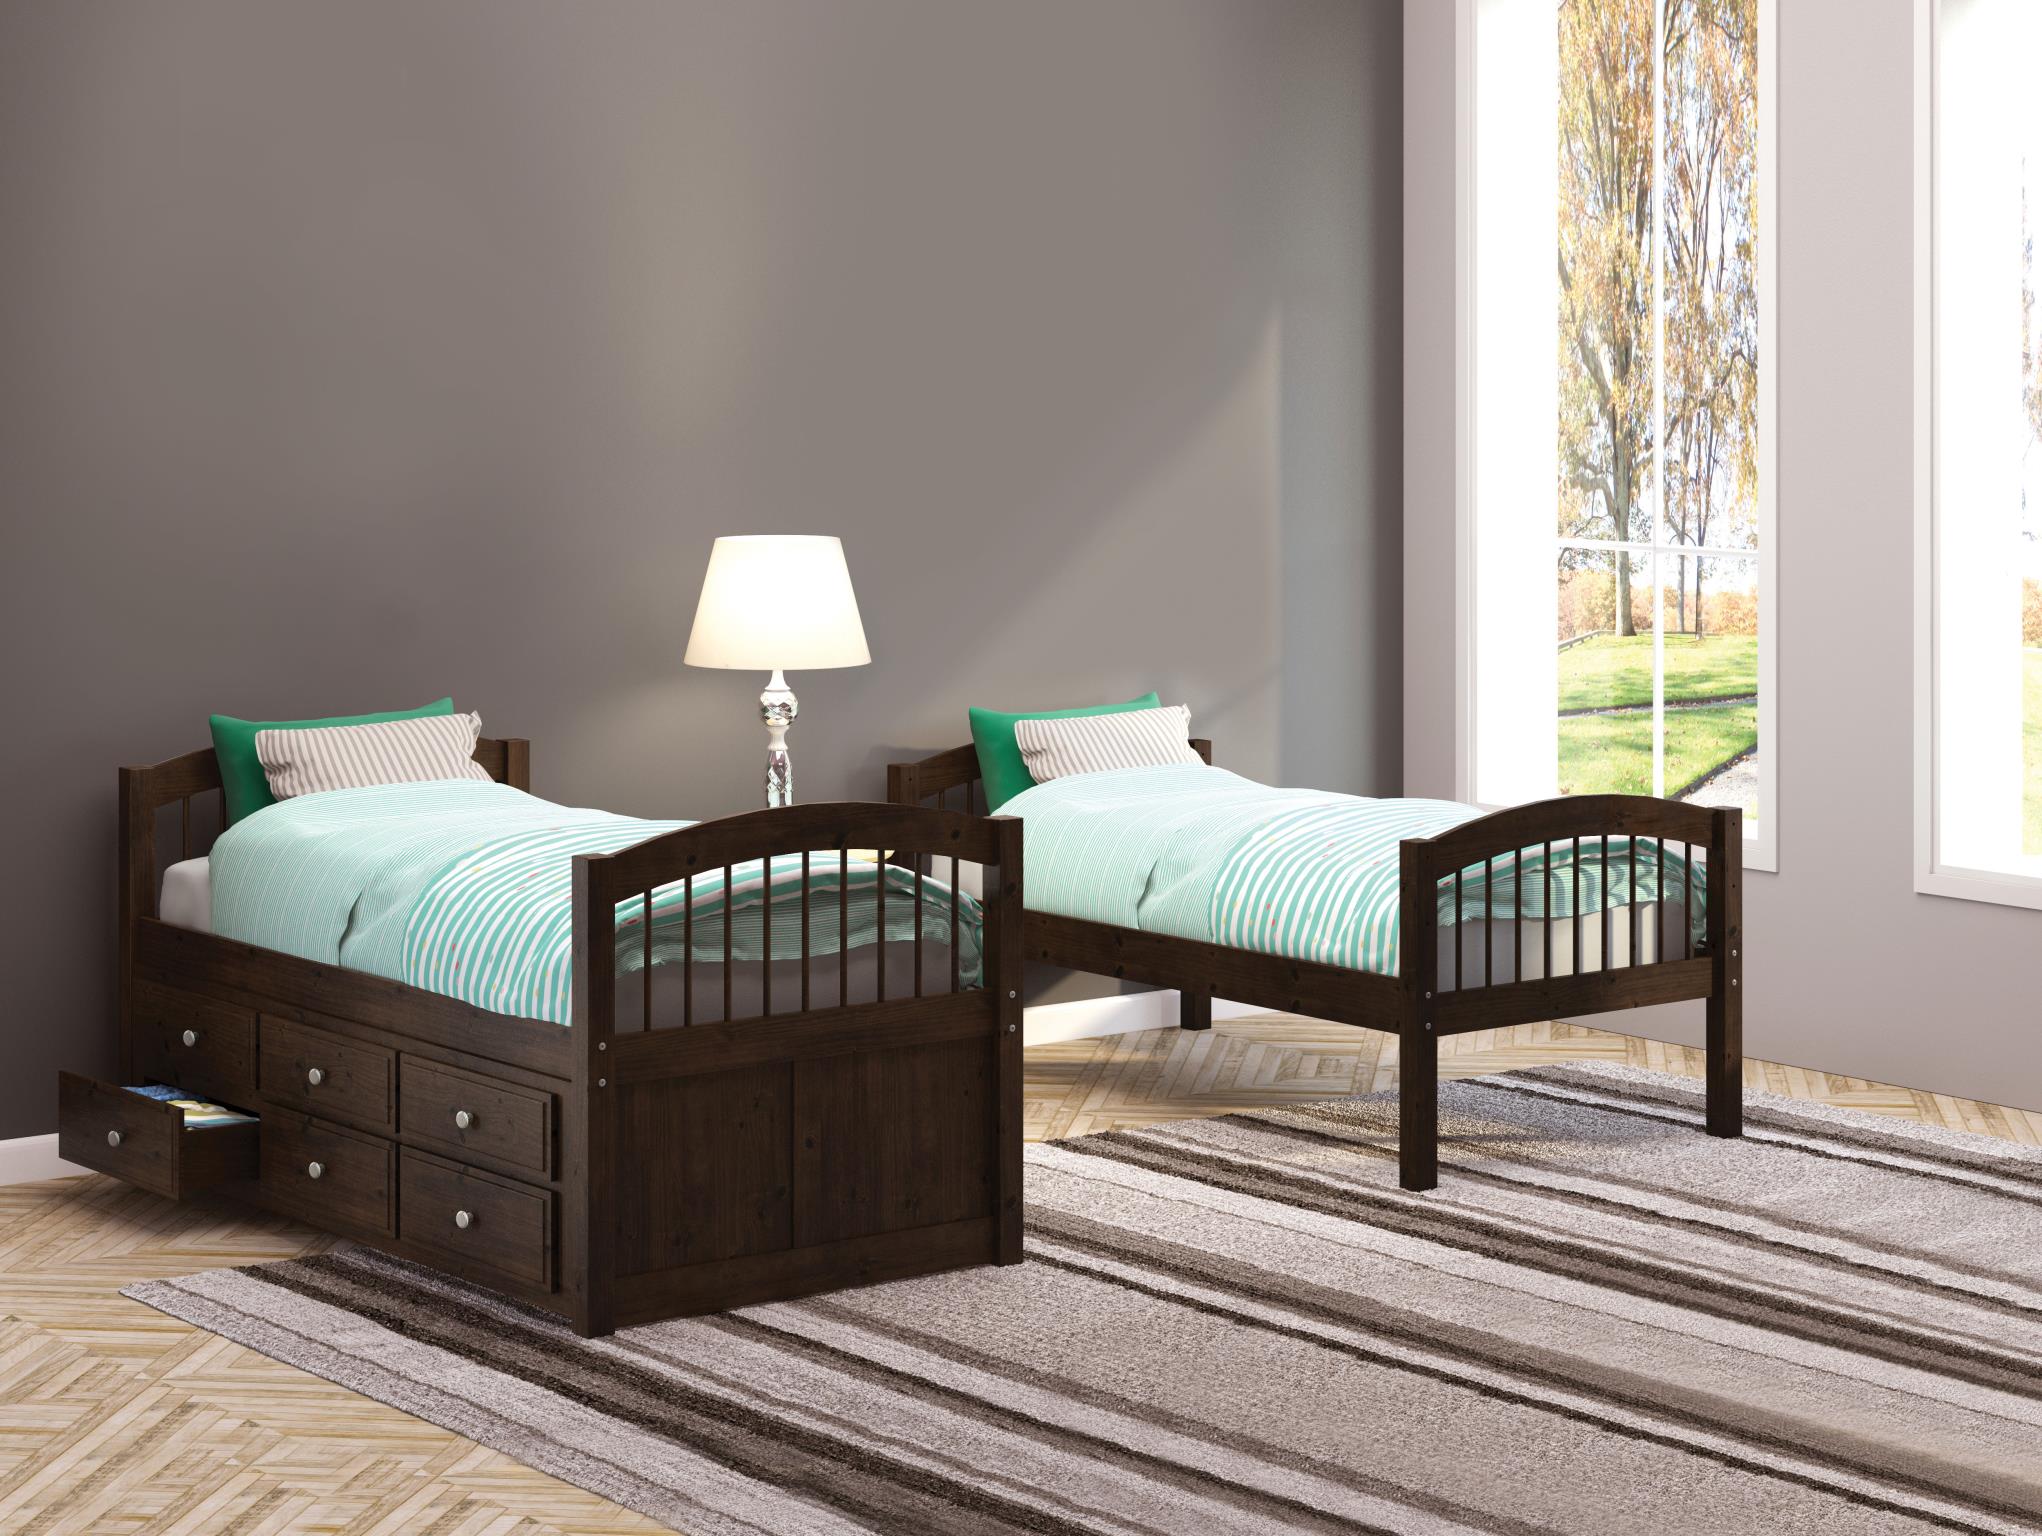 Espresso Twin/Twin Bunk Beds Used Separately